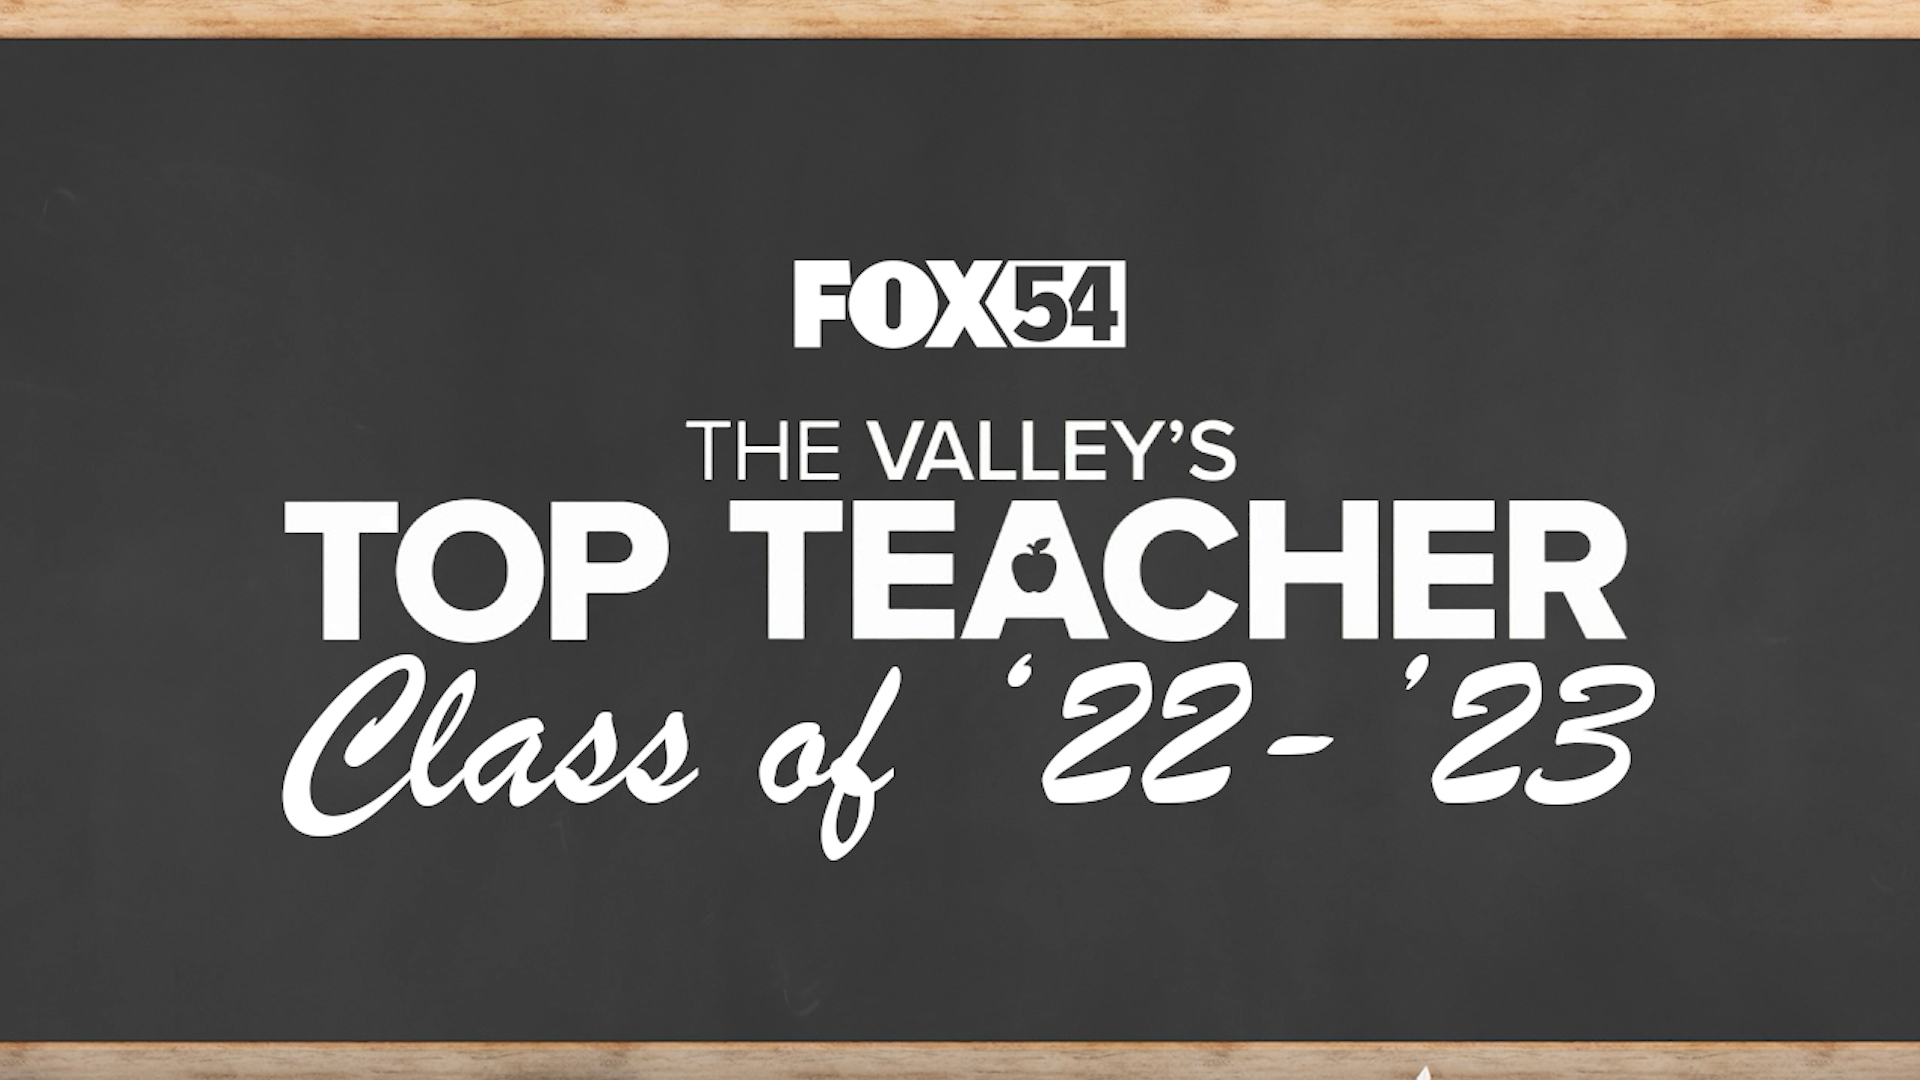 Meet every super teacher we've met this past school year with a two-part special coming soon to FOX54+!